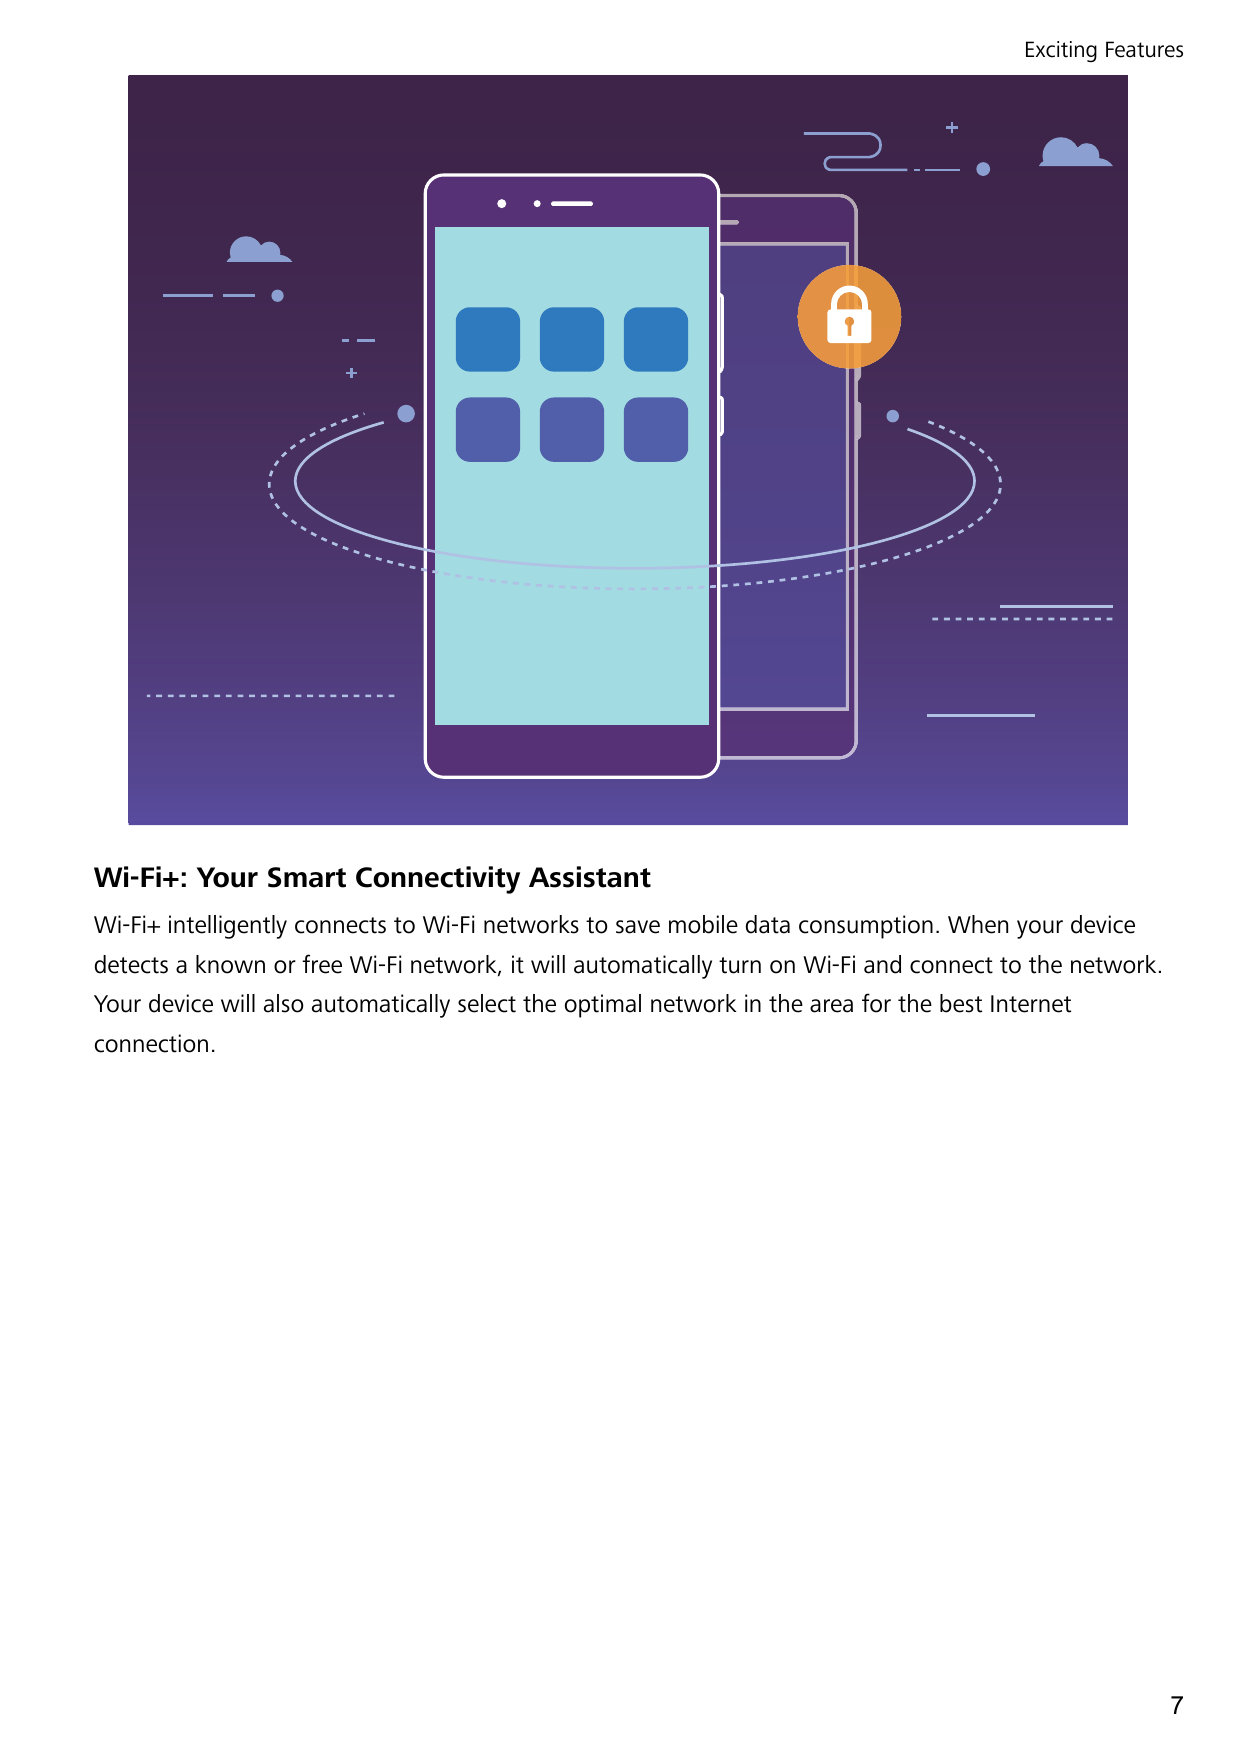 Exciting FeaturesWi-Fi+: Your Smart Connectivity AssistantWi-Fi+ intelligently connects to Wi-Fi networks to save mobile data co